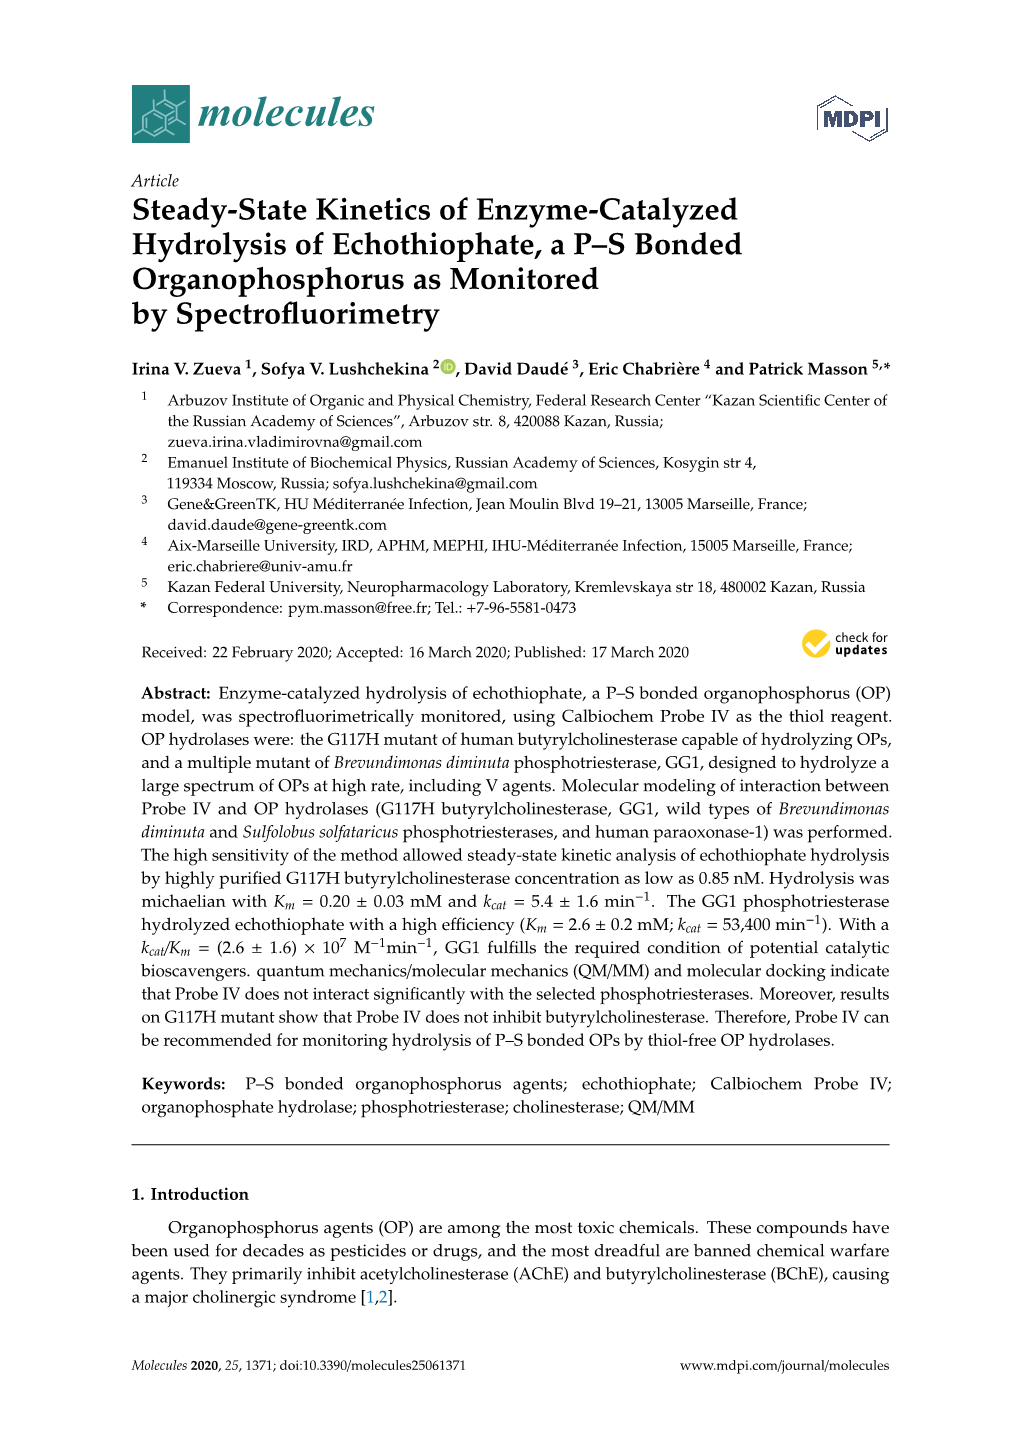 Steady-State Kinetics of Enzyme-Catalyzed Hydrolysis of Echothiophate, a P–S Bonded Organophosphorus As Monitored by Spectroﬂuorimetry